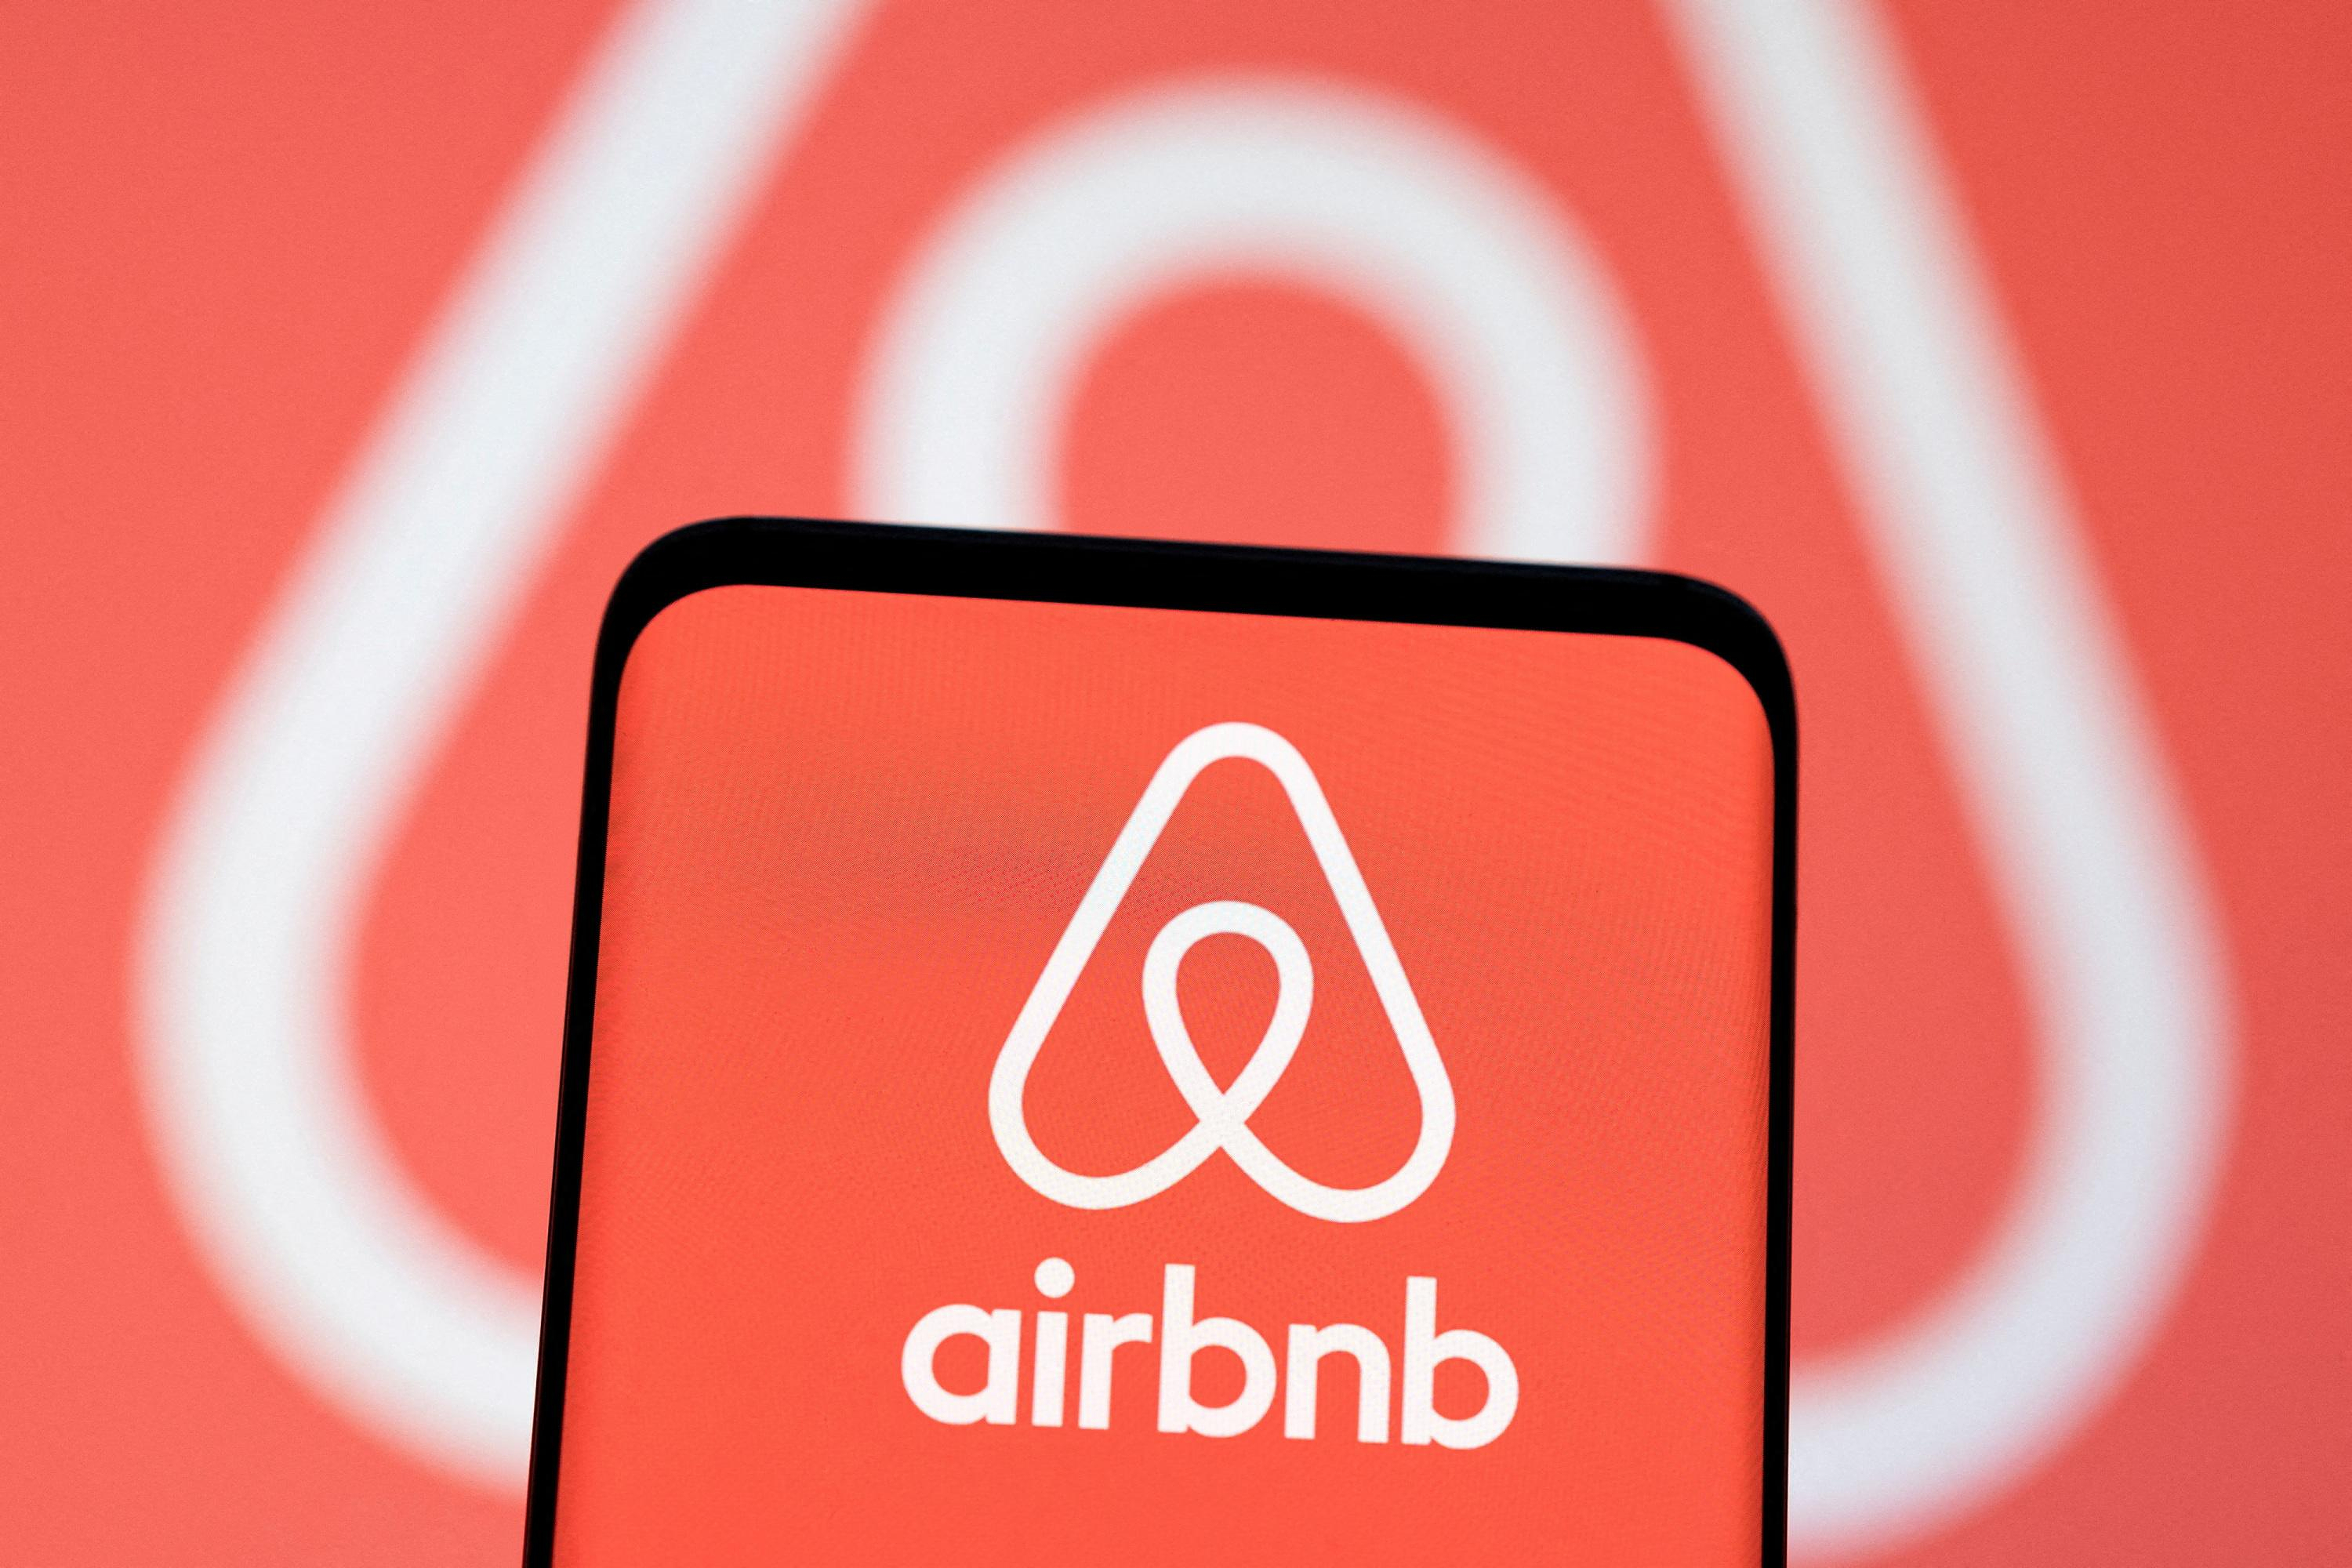 For the 2024 Olympics, Airbnb commits to fighting prostitution in its accommodation